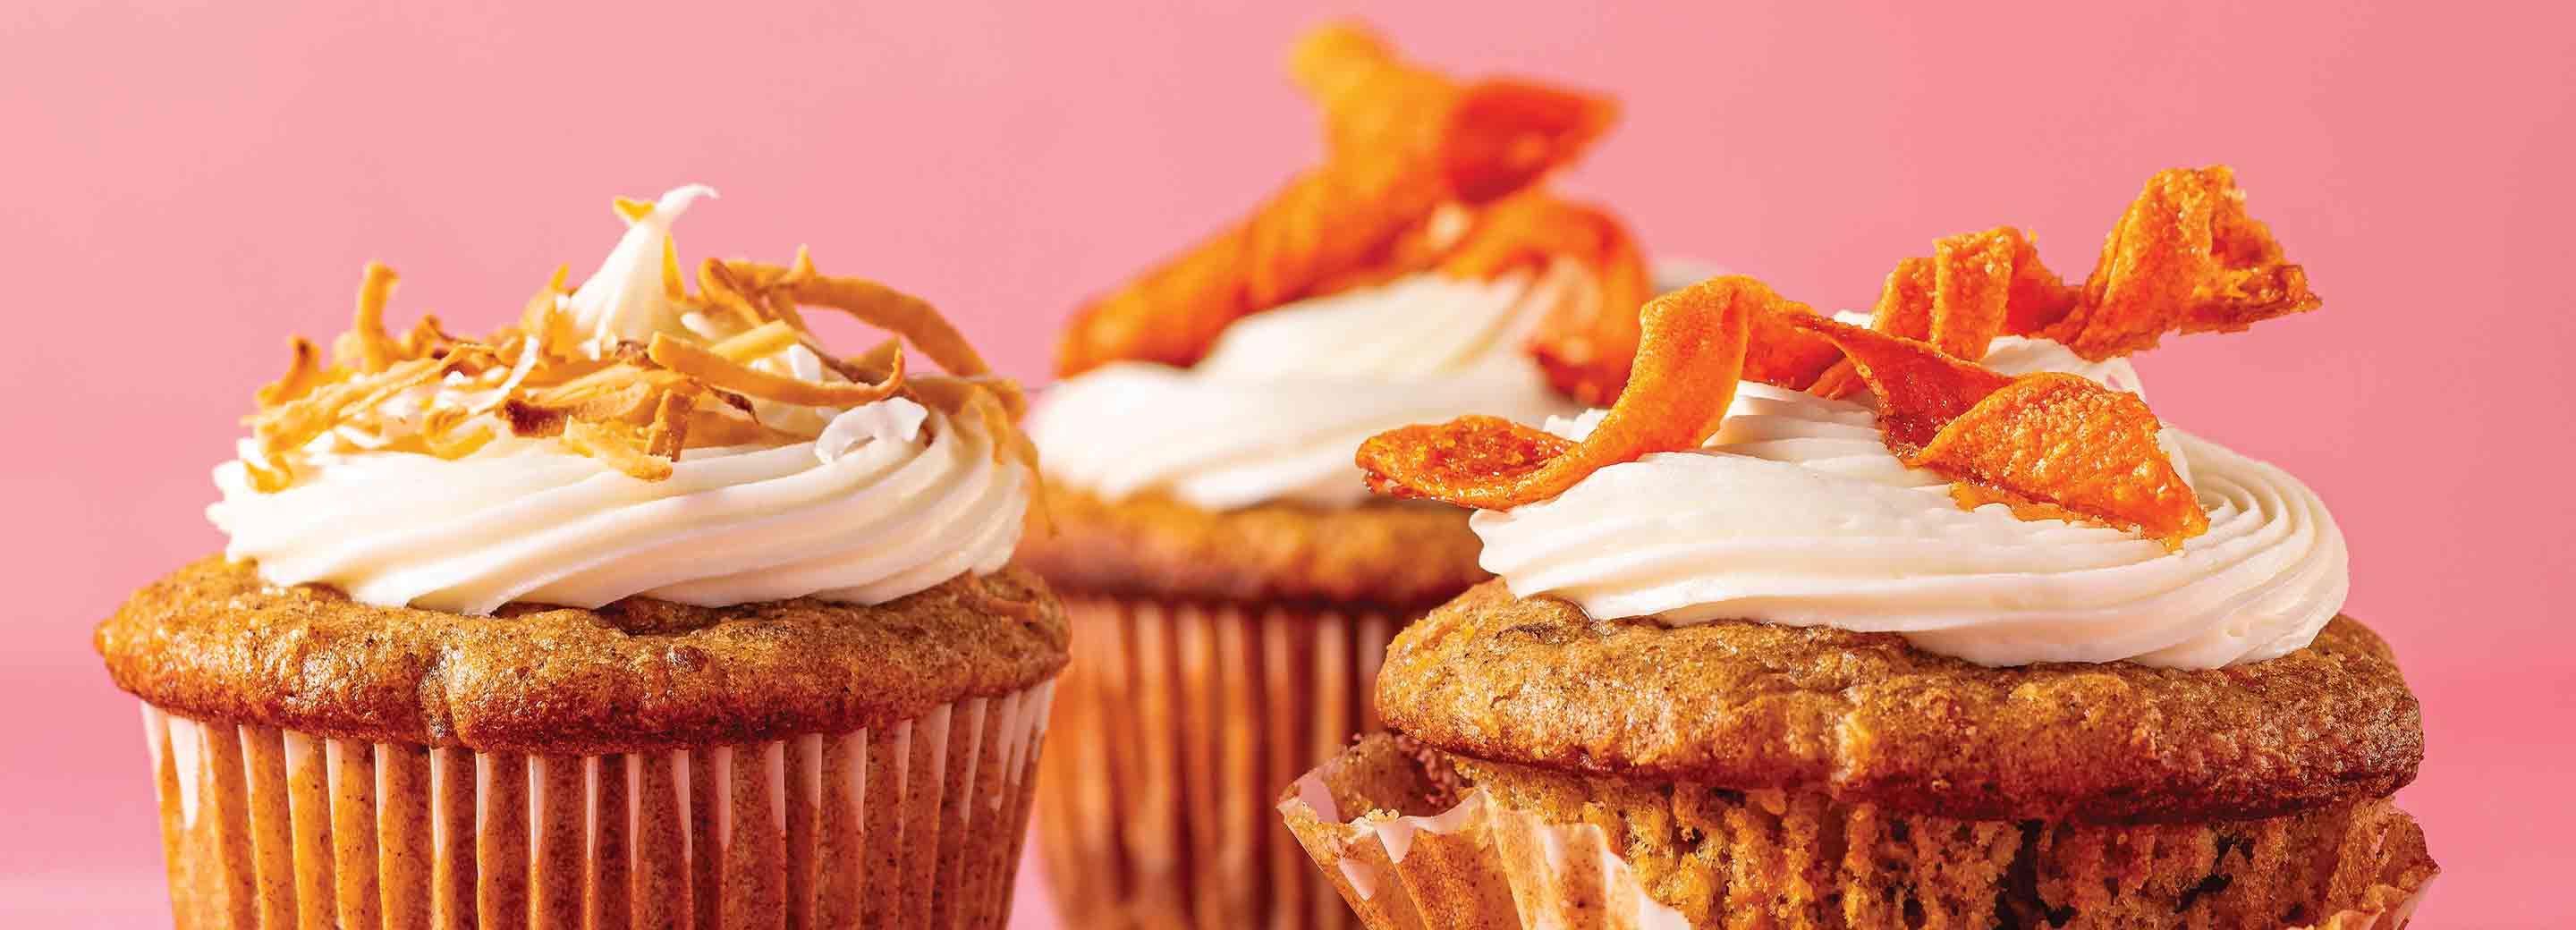 Pineapple & Carrot Cupcakes with Candied Carrots